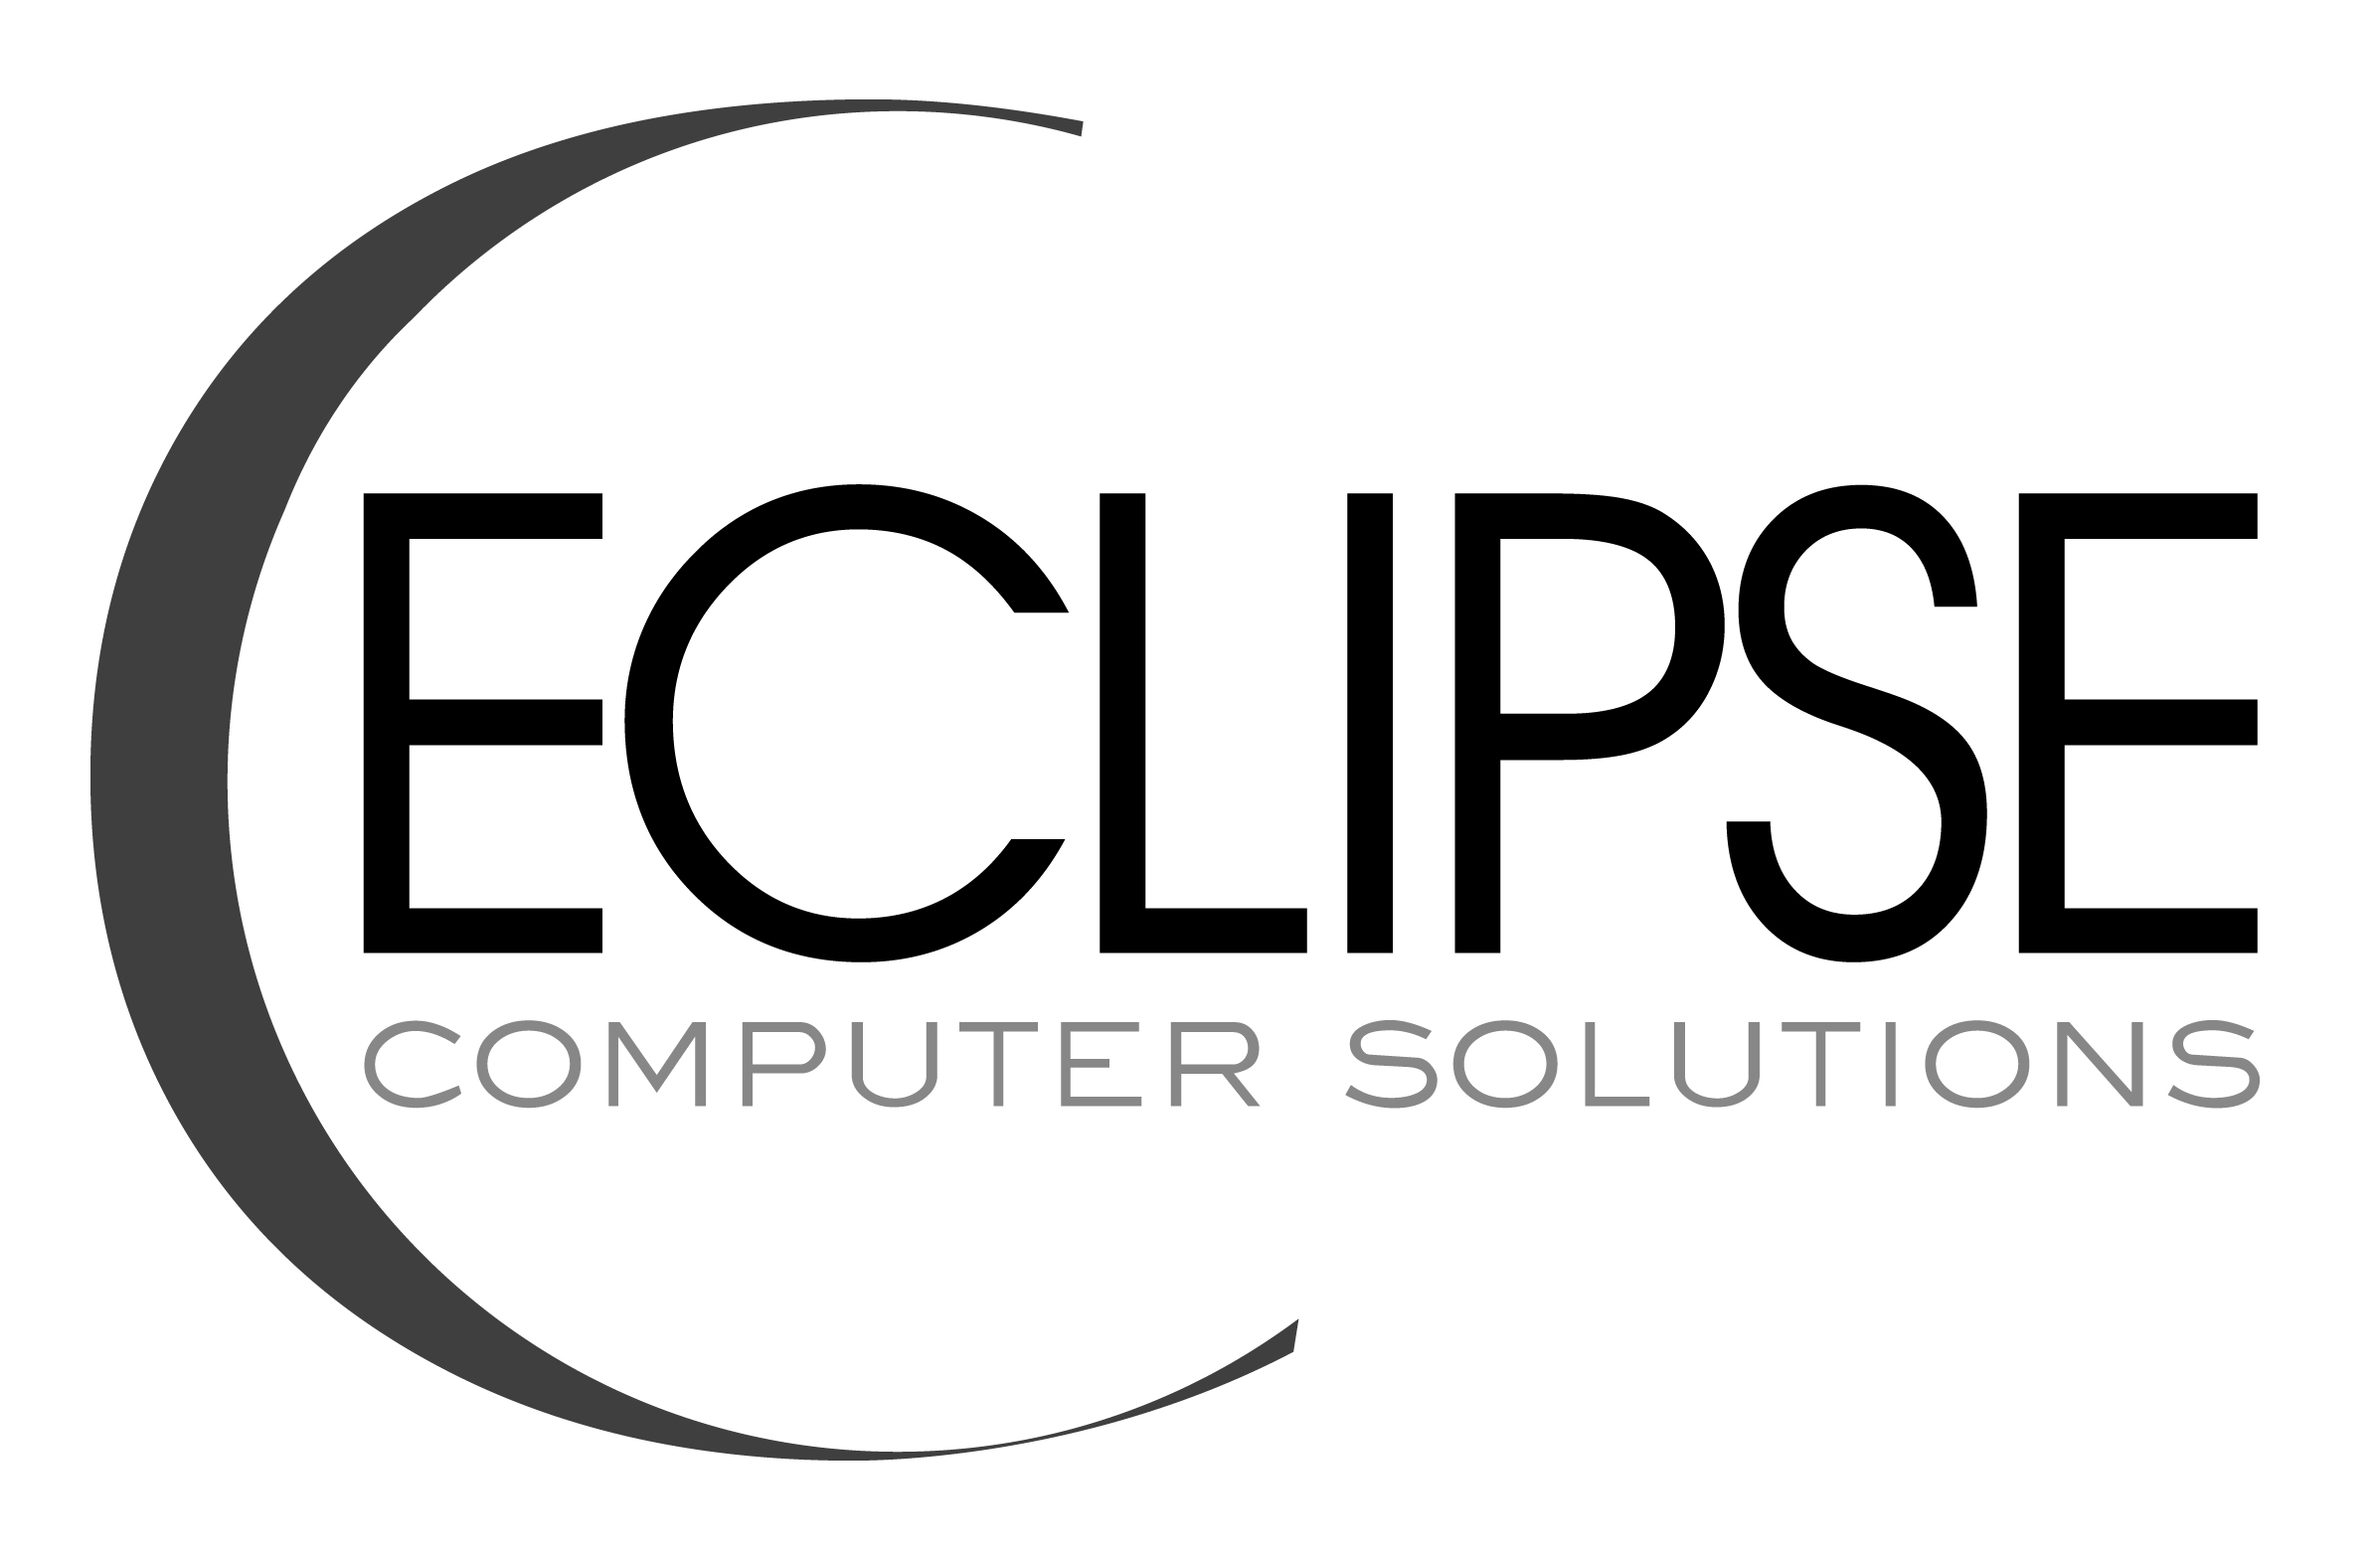 Eclipse Computer Solutions Logo